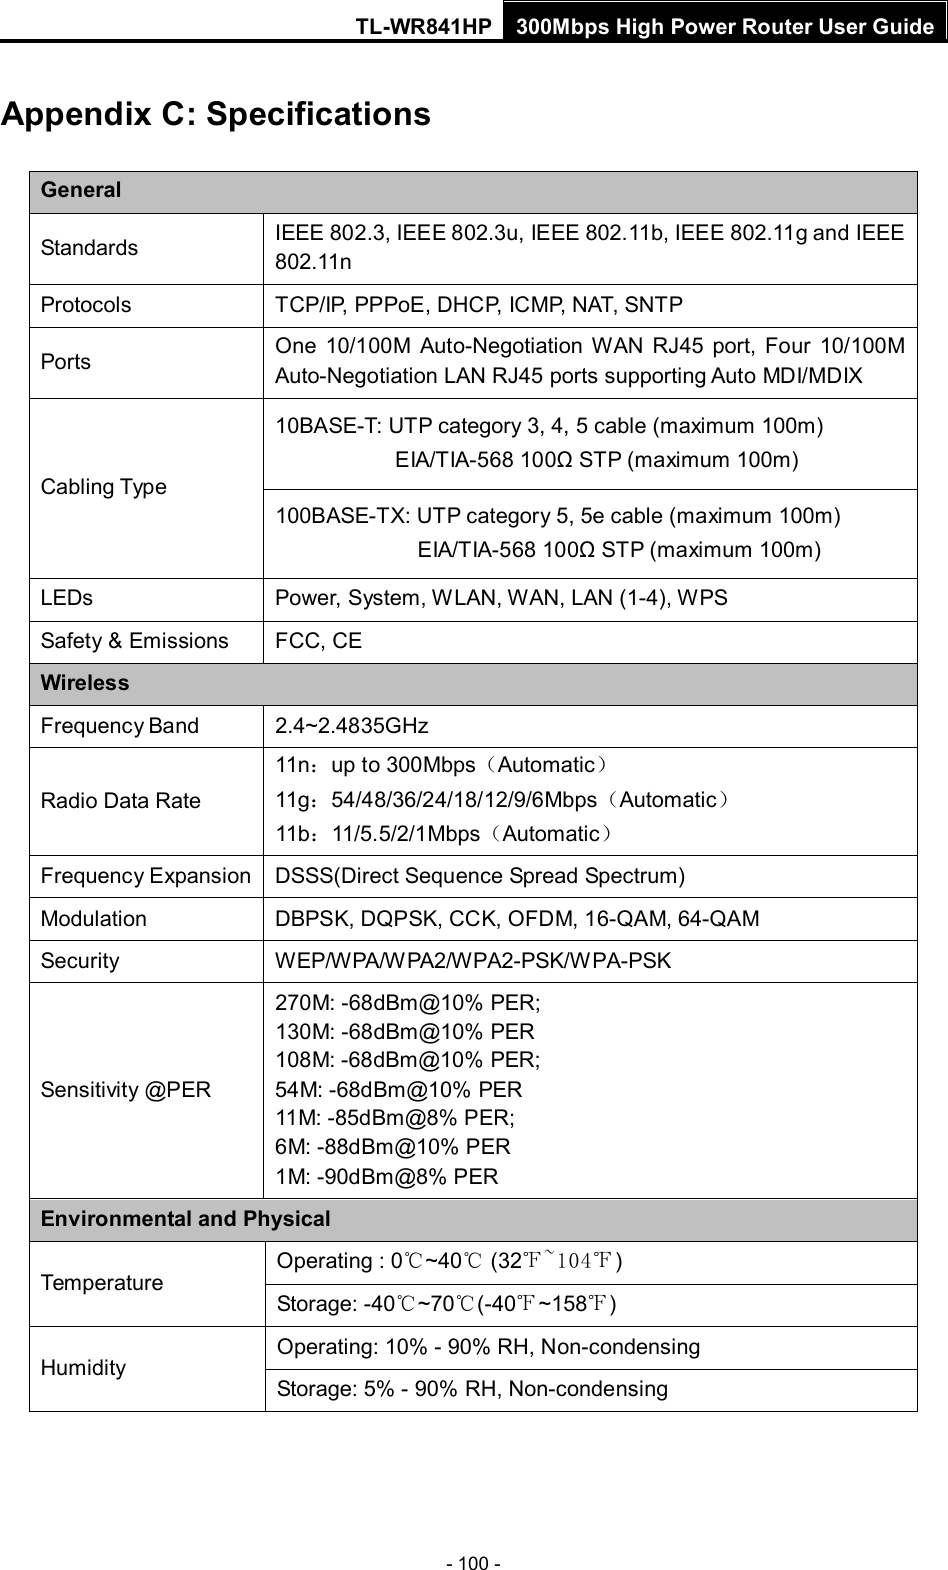 TL-WR841HP 300Mbps High Power Router User Guide  - 100 - Appendix C: Specifications General Standards IEEE 802.3, IEEE 802.3u, IEEE 802.11b, IEEE 802.11g and IEEE 802.11n Protocols TCP/IP, PPPoE, DHCP, ICMP, NAT, SNTP Ports One 10/100M Auto-Negotiation WAN RJ45 port, Four 10/100M Auto-Negotiation LAN RJ45 ports supporting Auto MDI/MDIX Cabling Type 10BASE-T: UTP category 3, 4, 5 cable (maximum 100m) EIA/TIA-568 100Ω STP (maximum 100m) 100BASE-TX: UTP category 5, 5e cable (maximum 100m) EIA/TIA-568 100Ω STP (maximum 100m) LEDs Power, System, WLAN, WAN, LAN (1-4), W PS Safety &amp; Emissions FCC, CE Wireless Frequency Band 2.4~2.4835GHz Radio Data Rate 11n：up to 300Mbps（Automatic） 11g：54/48/36/24/18/12/9/6Mbps（Automatic） 11b：11/5.5/2/1Mbps（Automatic） Frequency Expansion DSSS(Direct Sequence Spread Spectrum) Modulation DBPSK, DQPSK, CCK, OFDM, 16-QAM, 64-QAM Security WEP/WPA/WPA2/WPA2-PSK/WPA-PSK Sensitivity @PER 270M: -68dBm@10% PER; 130M: -68dBm@10% PER 108M: -68dBm@10% PER;   54M: -68dBm@10% PER 11M: -85dBm@8% PER;   6M: -88dBm@10% PER 1M: -90dBm@8% PER Environmental and Physical Temperature Operating : 0℃~40℃ (32℉~104℉) Storage: -40℃~70℃(-40℉~158℉) Humidity Operating: 10% - 90% RH, Non-condensing Storage: 5% - 90% RH, Non-condensing 